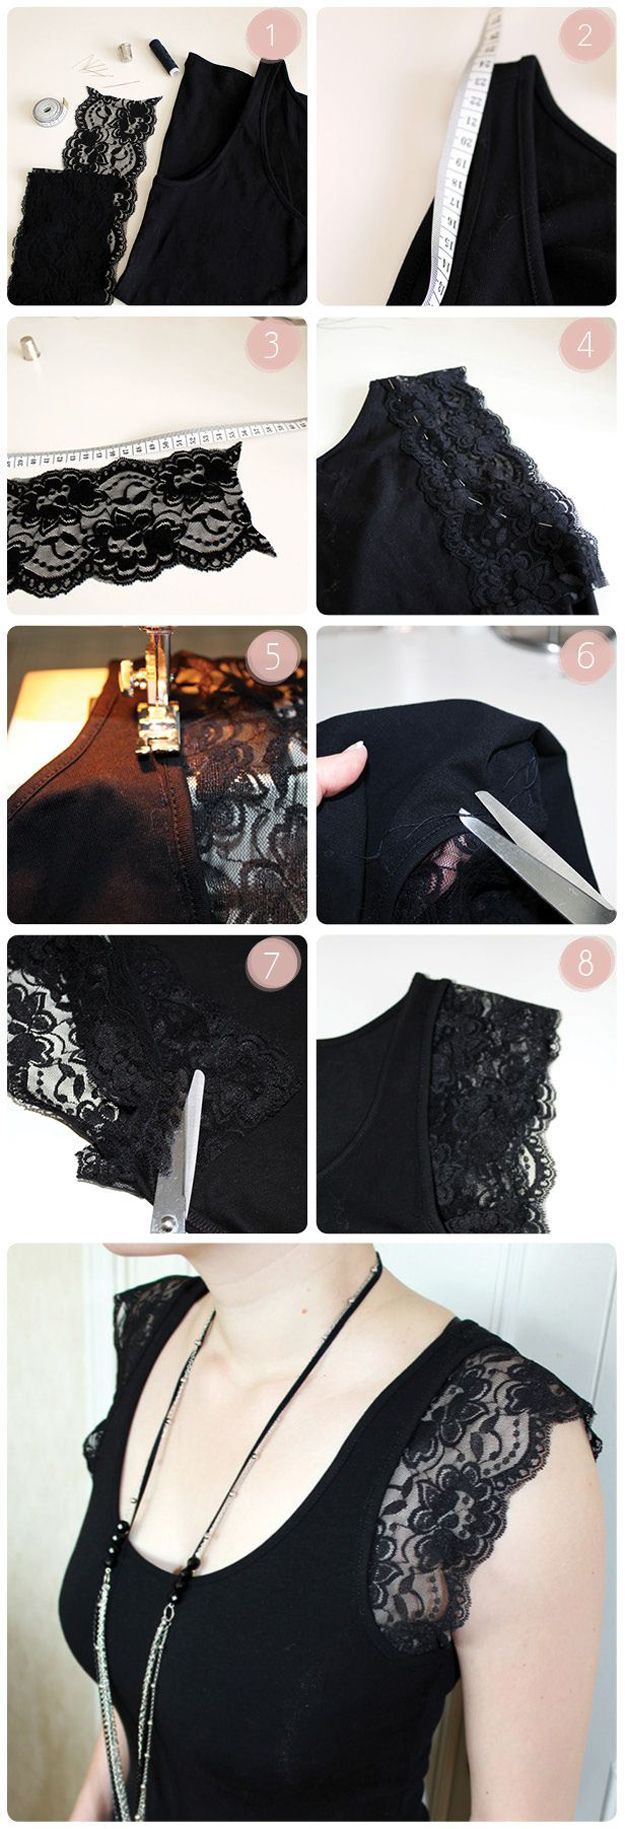 DIY Downtown Abbey Inspired Top | Simple DIY Lace Top Tutorial by DIY Ready